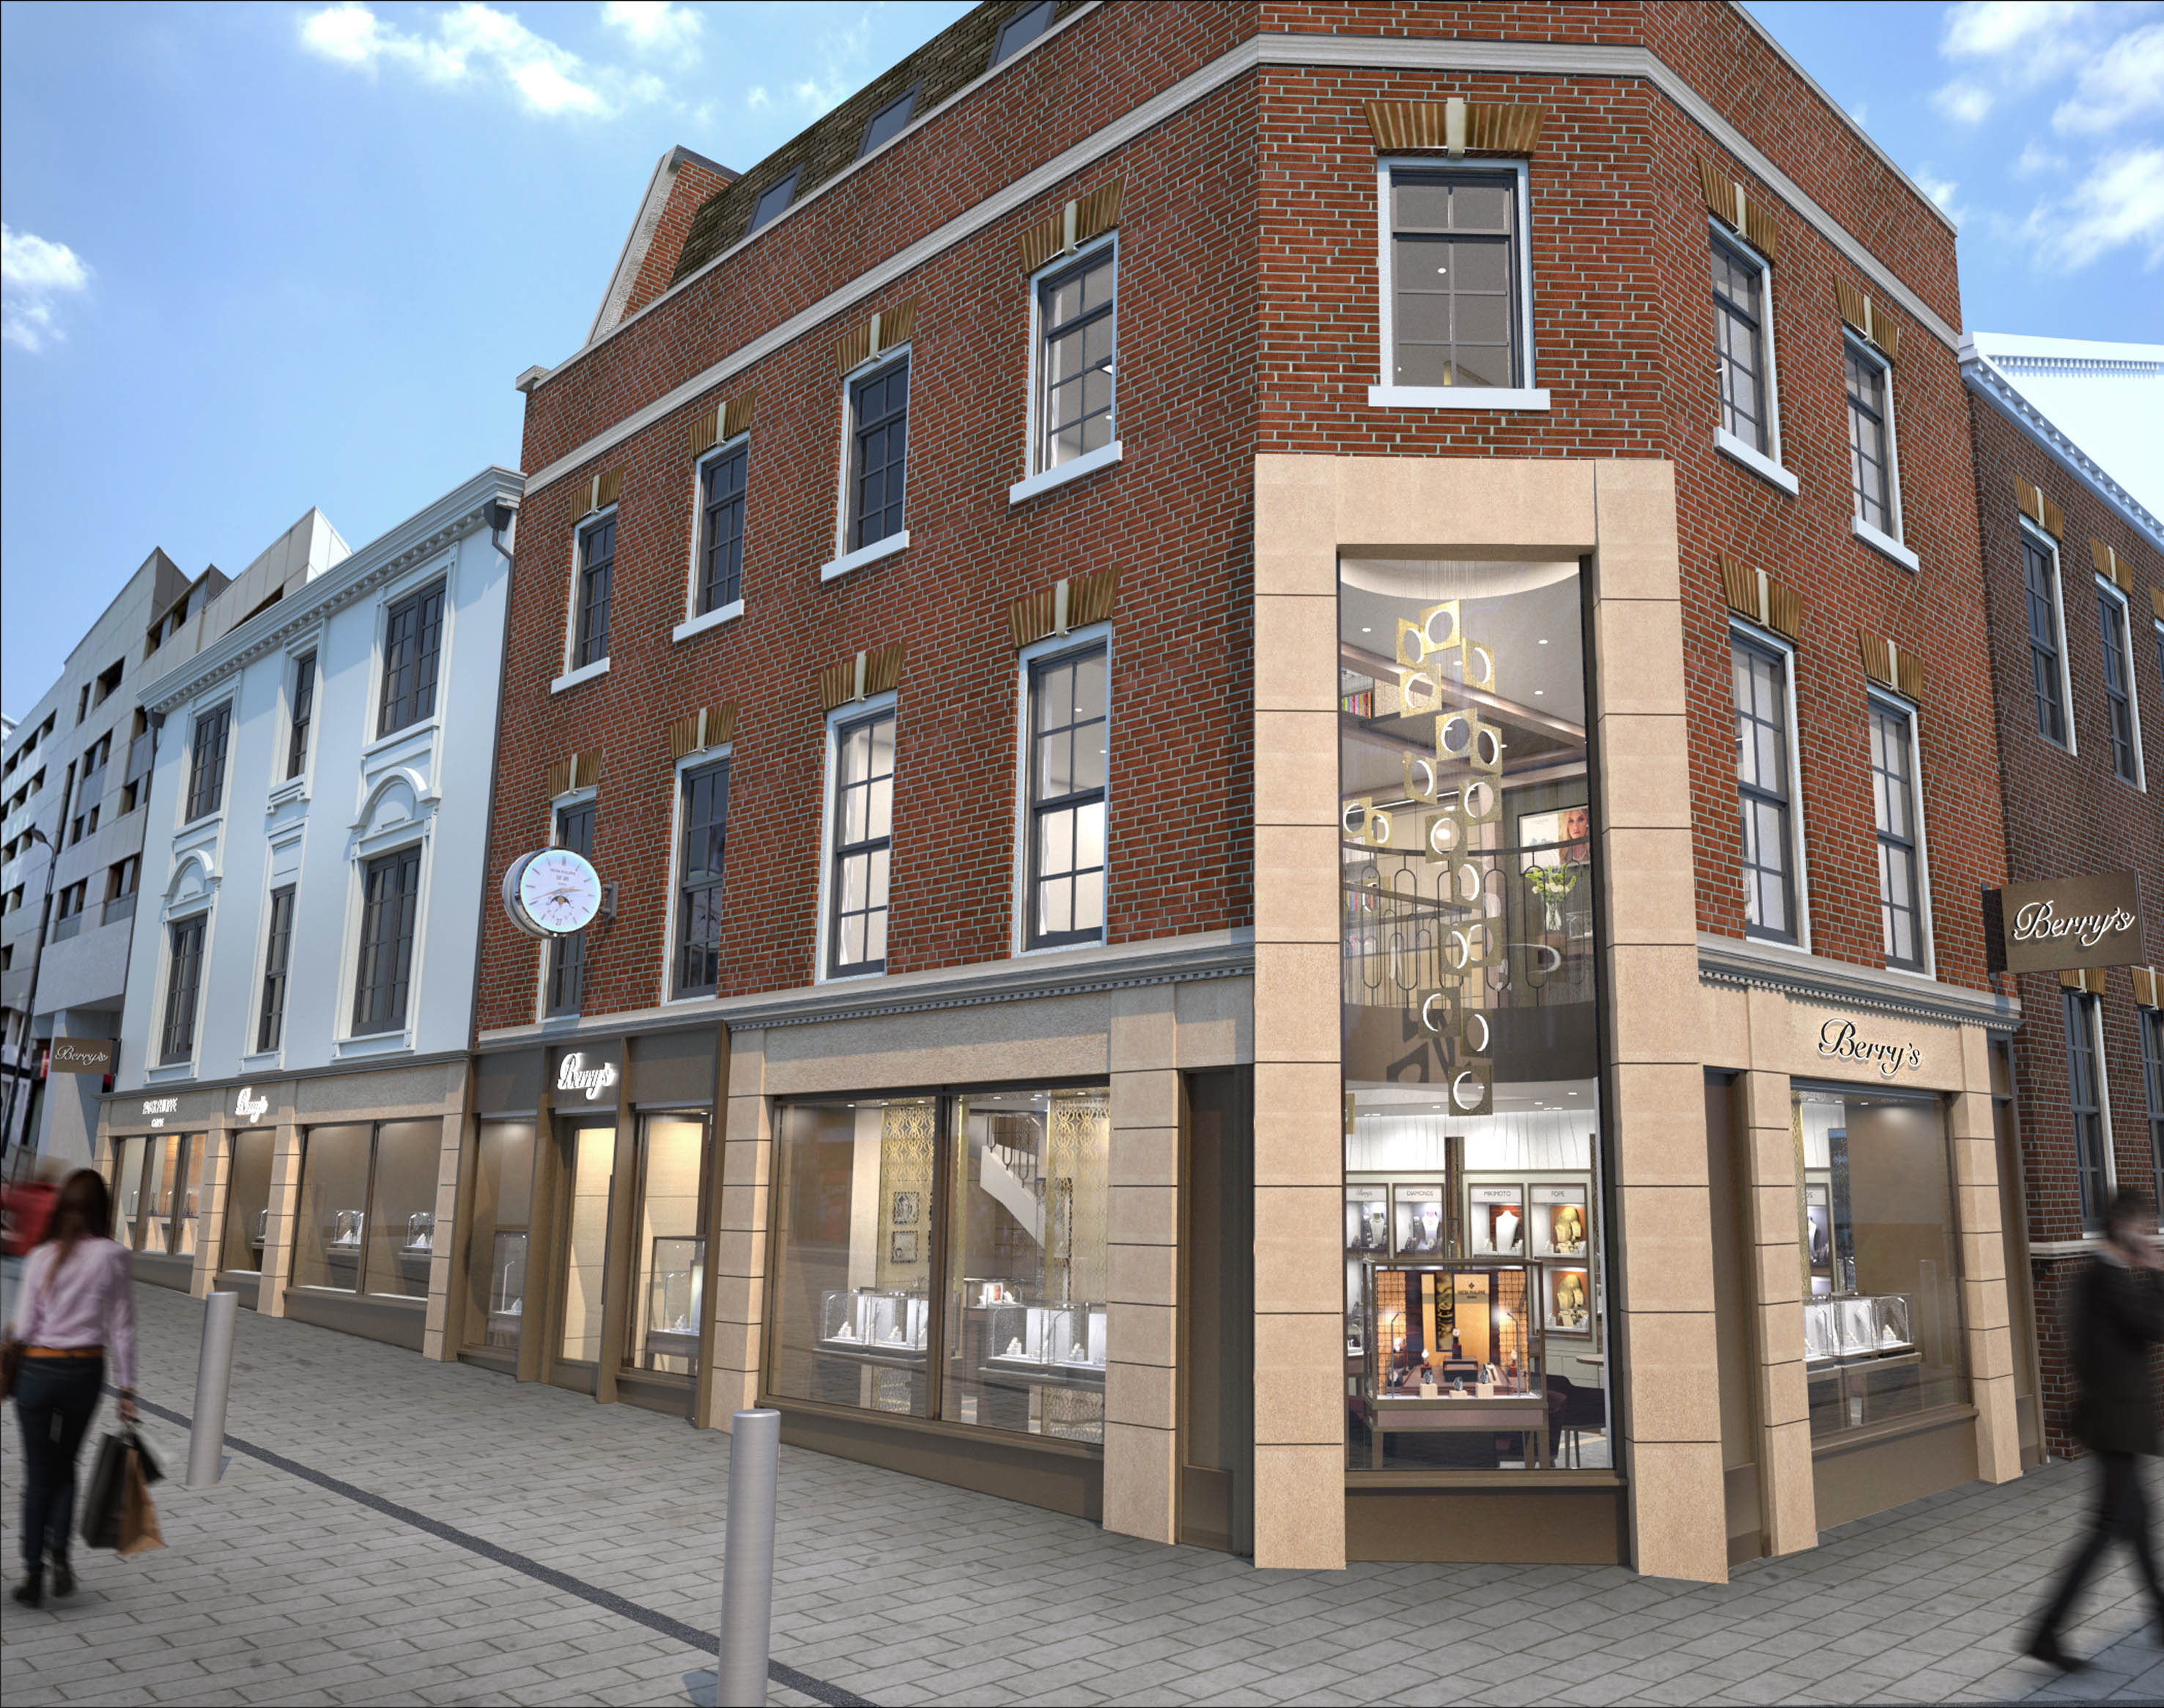 Berry's is doubling the size of its flagship leeds store this summer. This artist's impression shows how the corner position gives space to jewellery and luxury watch brands.